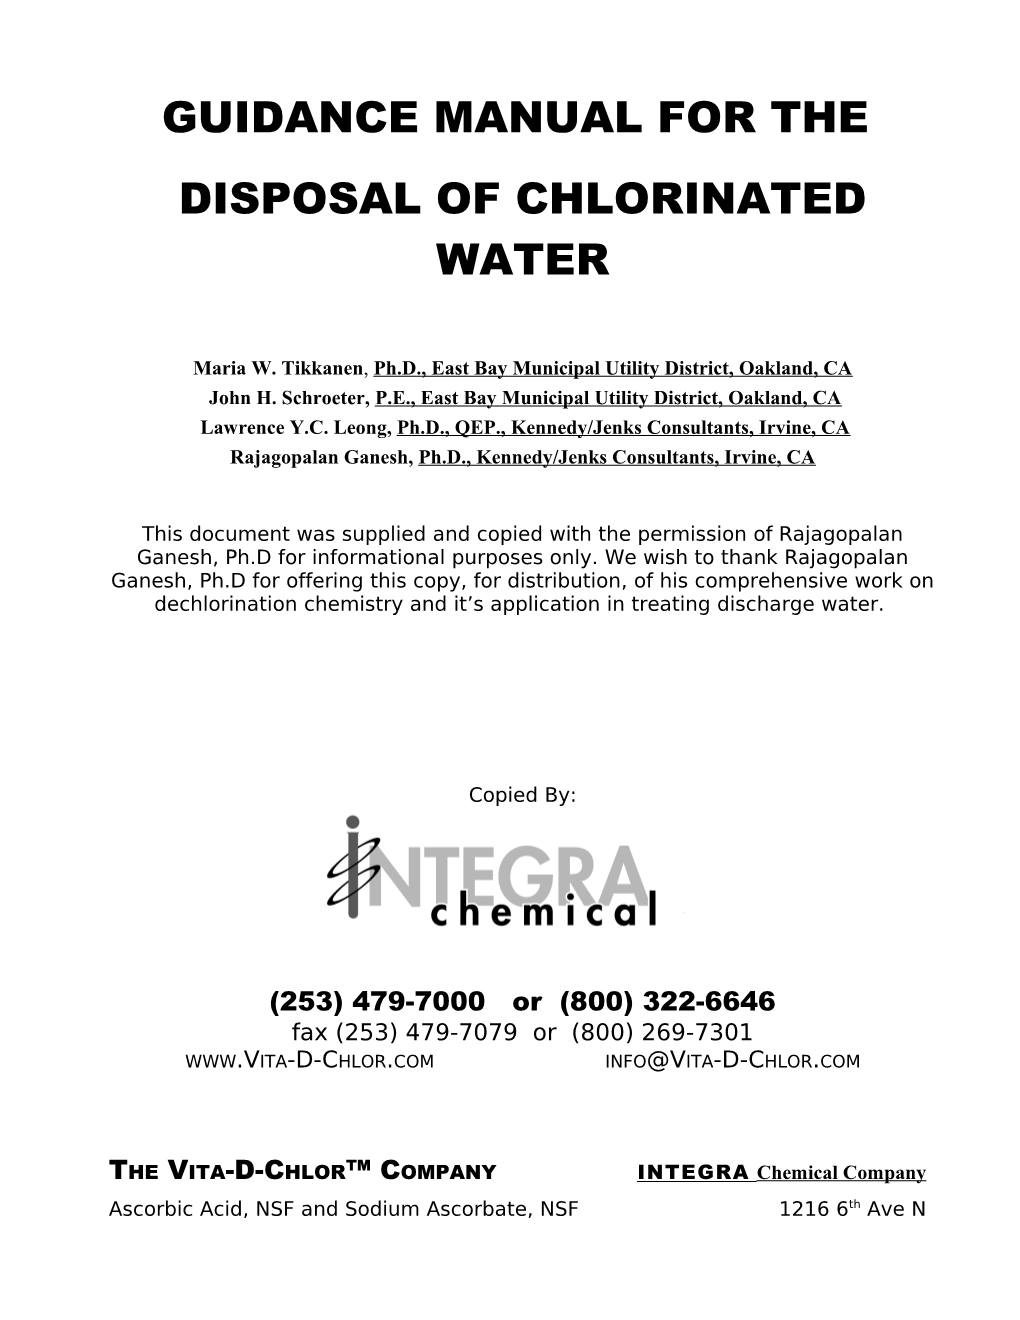 Guidance Manual for Disposal of Chlorinated Water